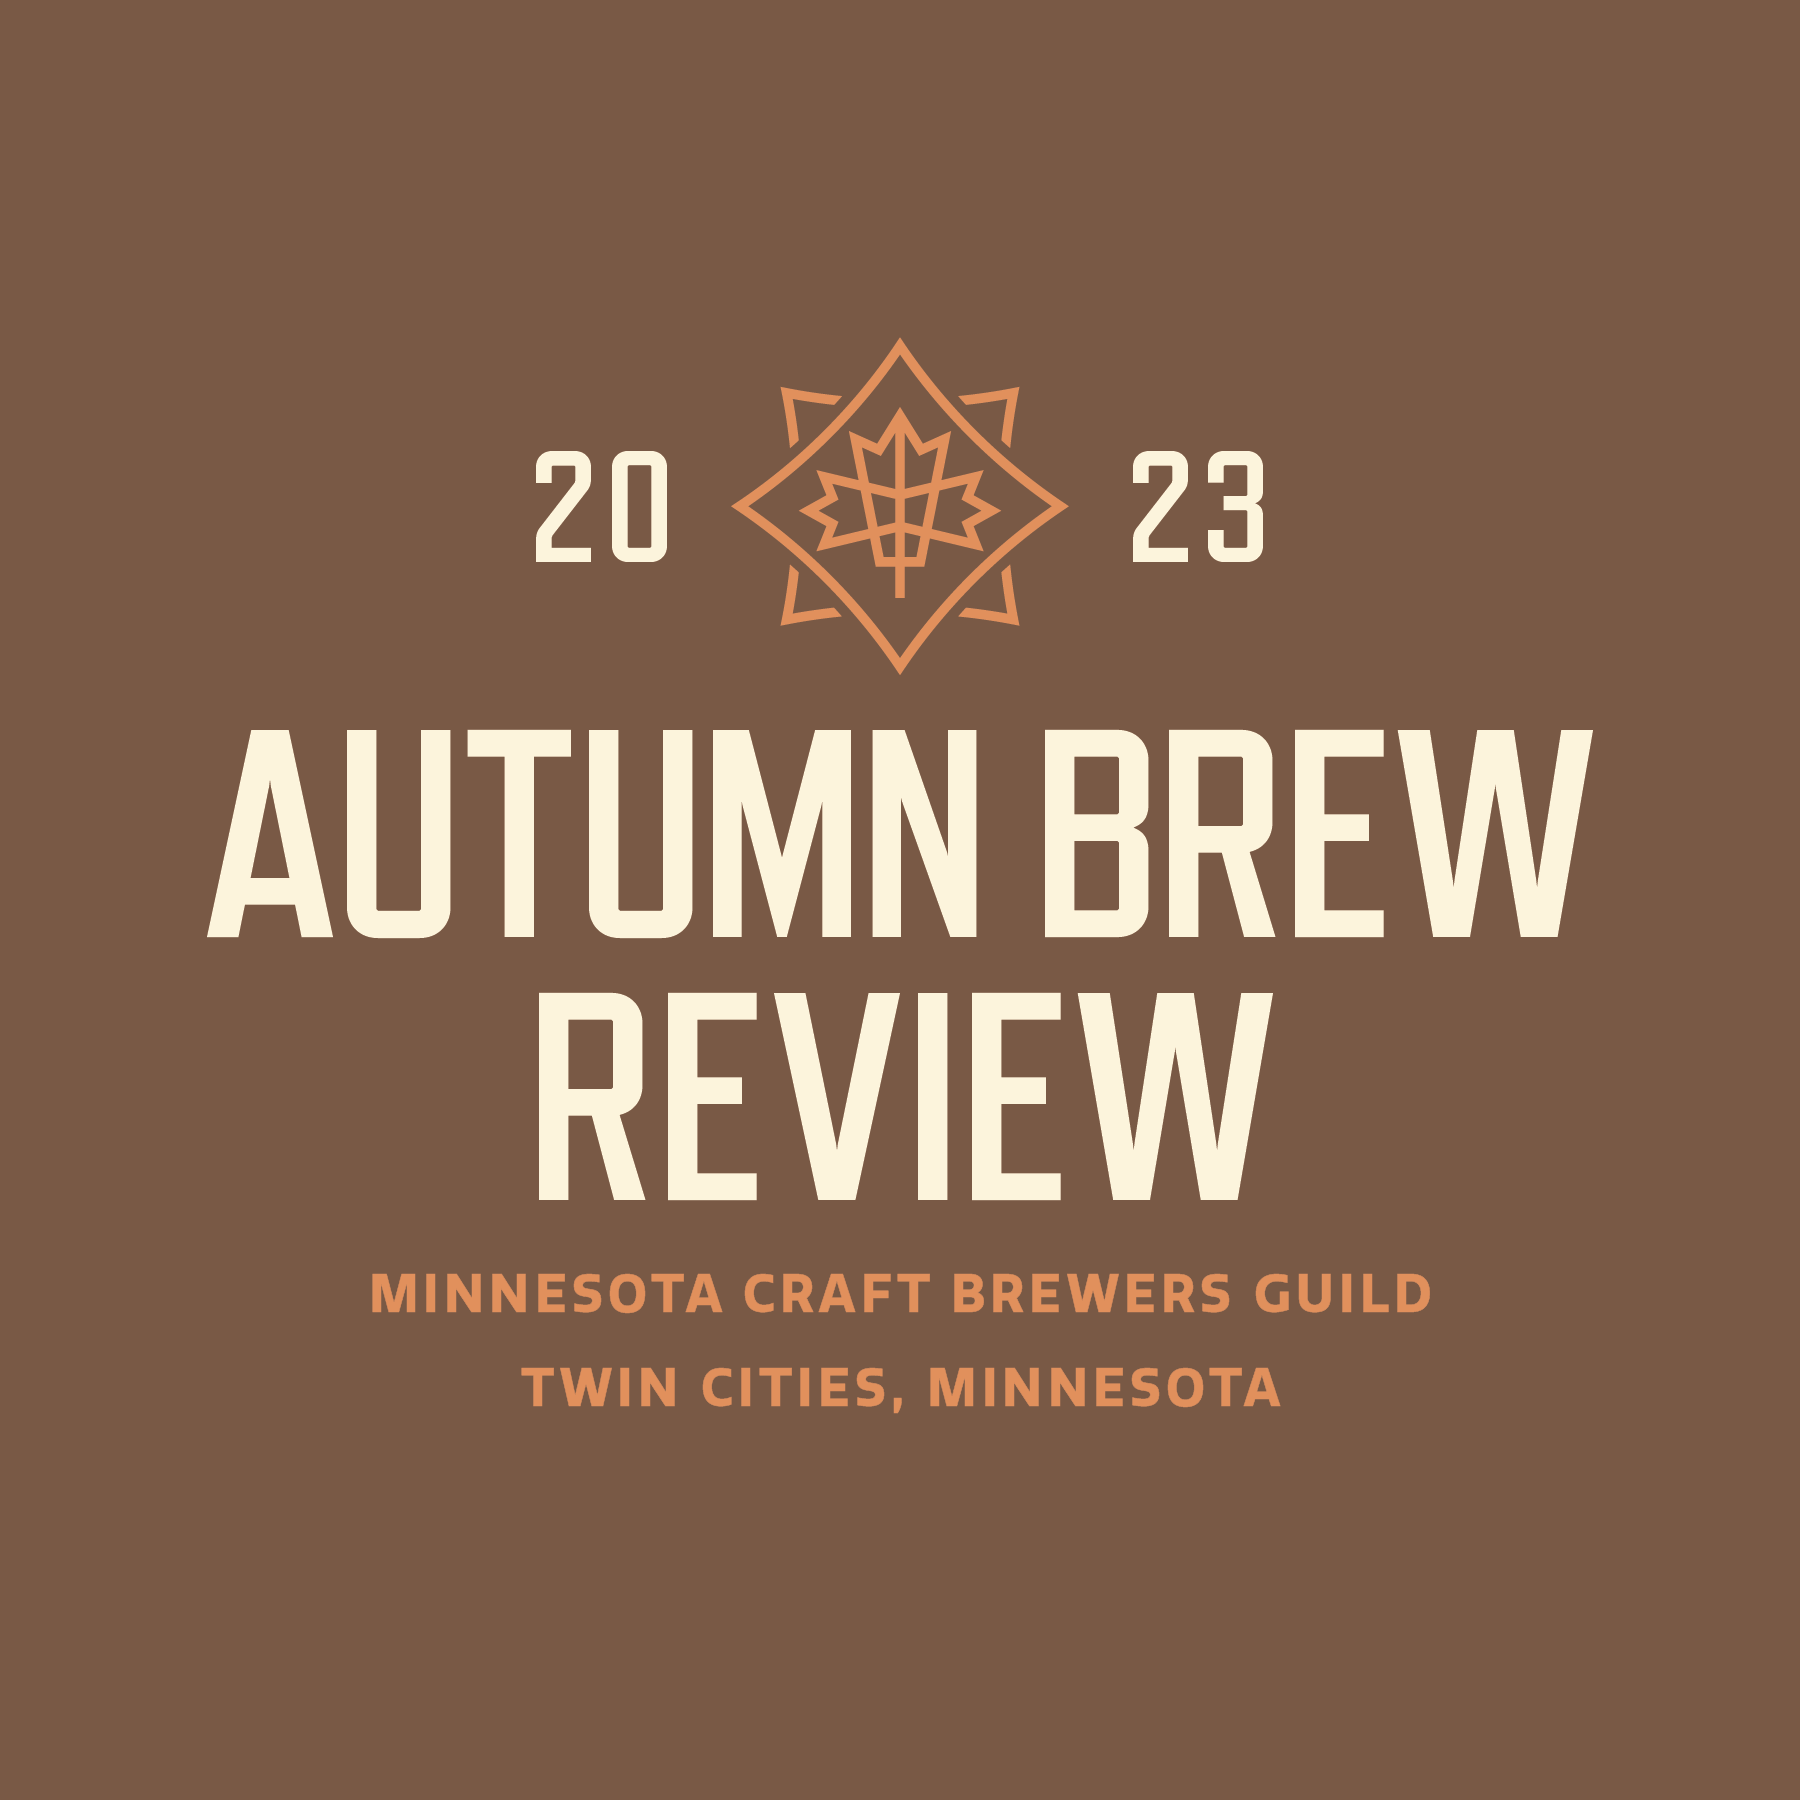 BREWED IN MN T-SHIRTS (PREVIOUS STYLE) – Minnesota Craft Brewers Guild